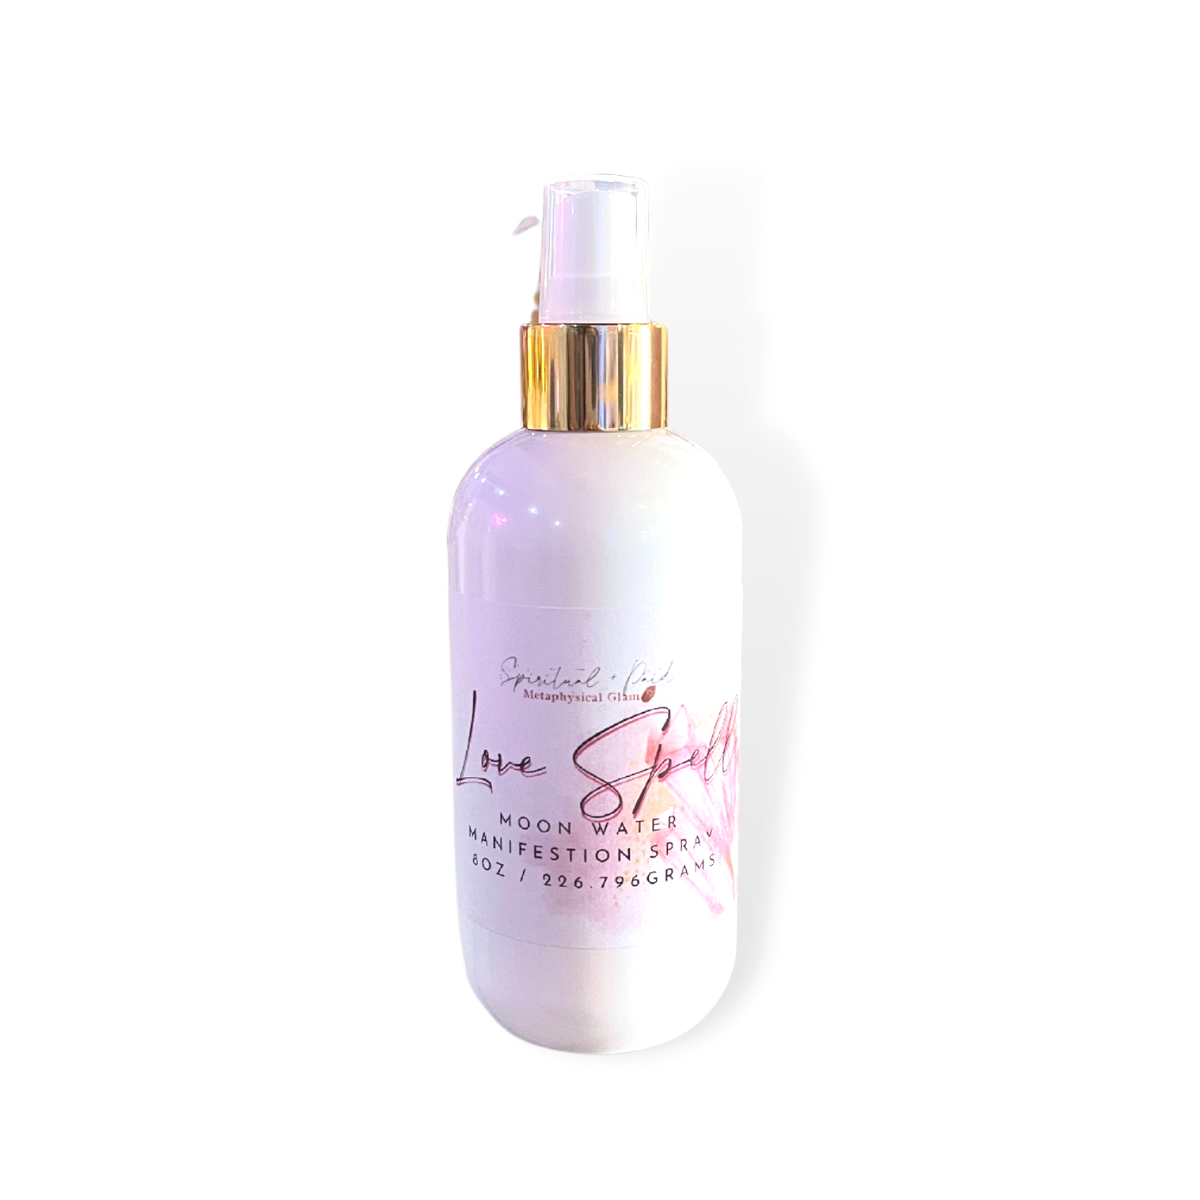 Love Spell Moon Water Manifestation Spray ~ Self Love, Bonding With Others, & Attraction